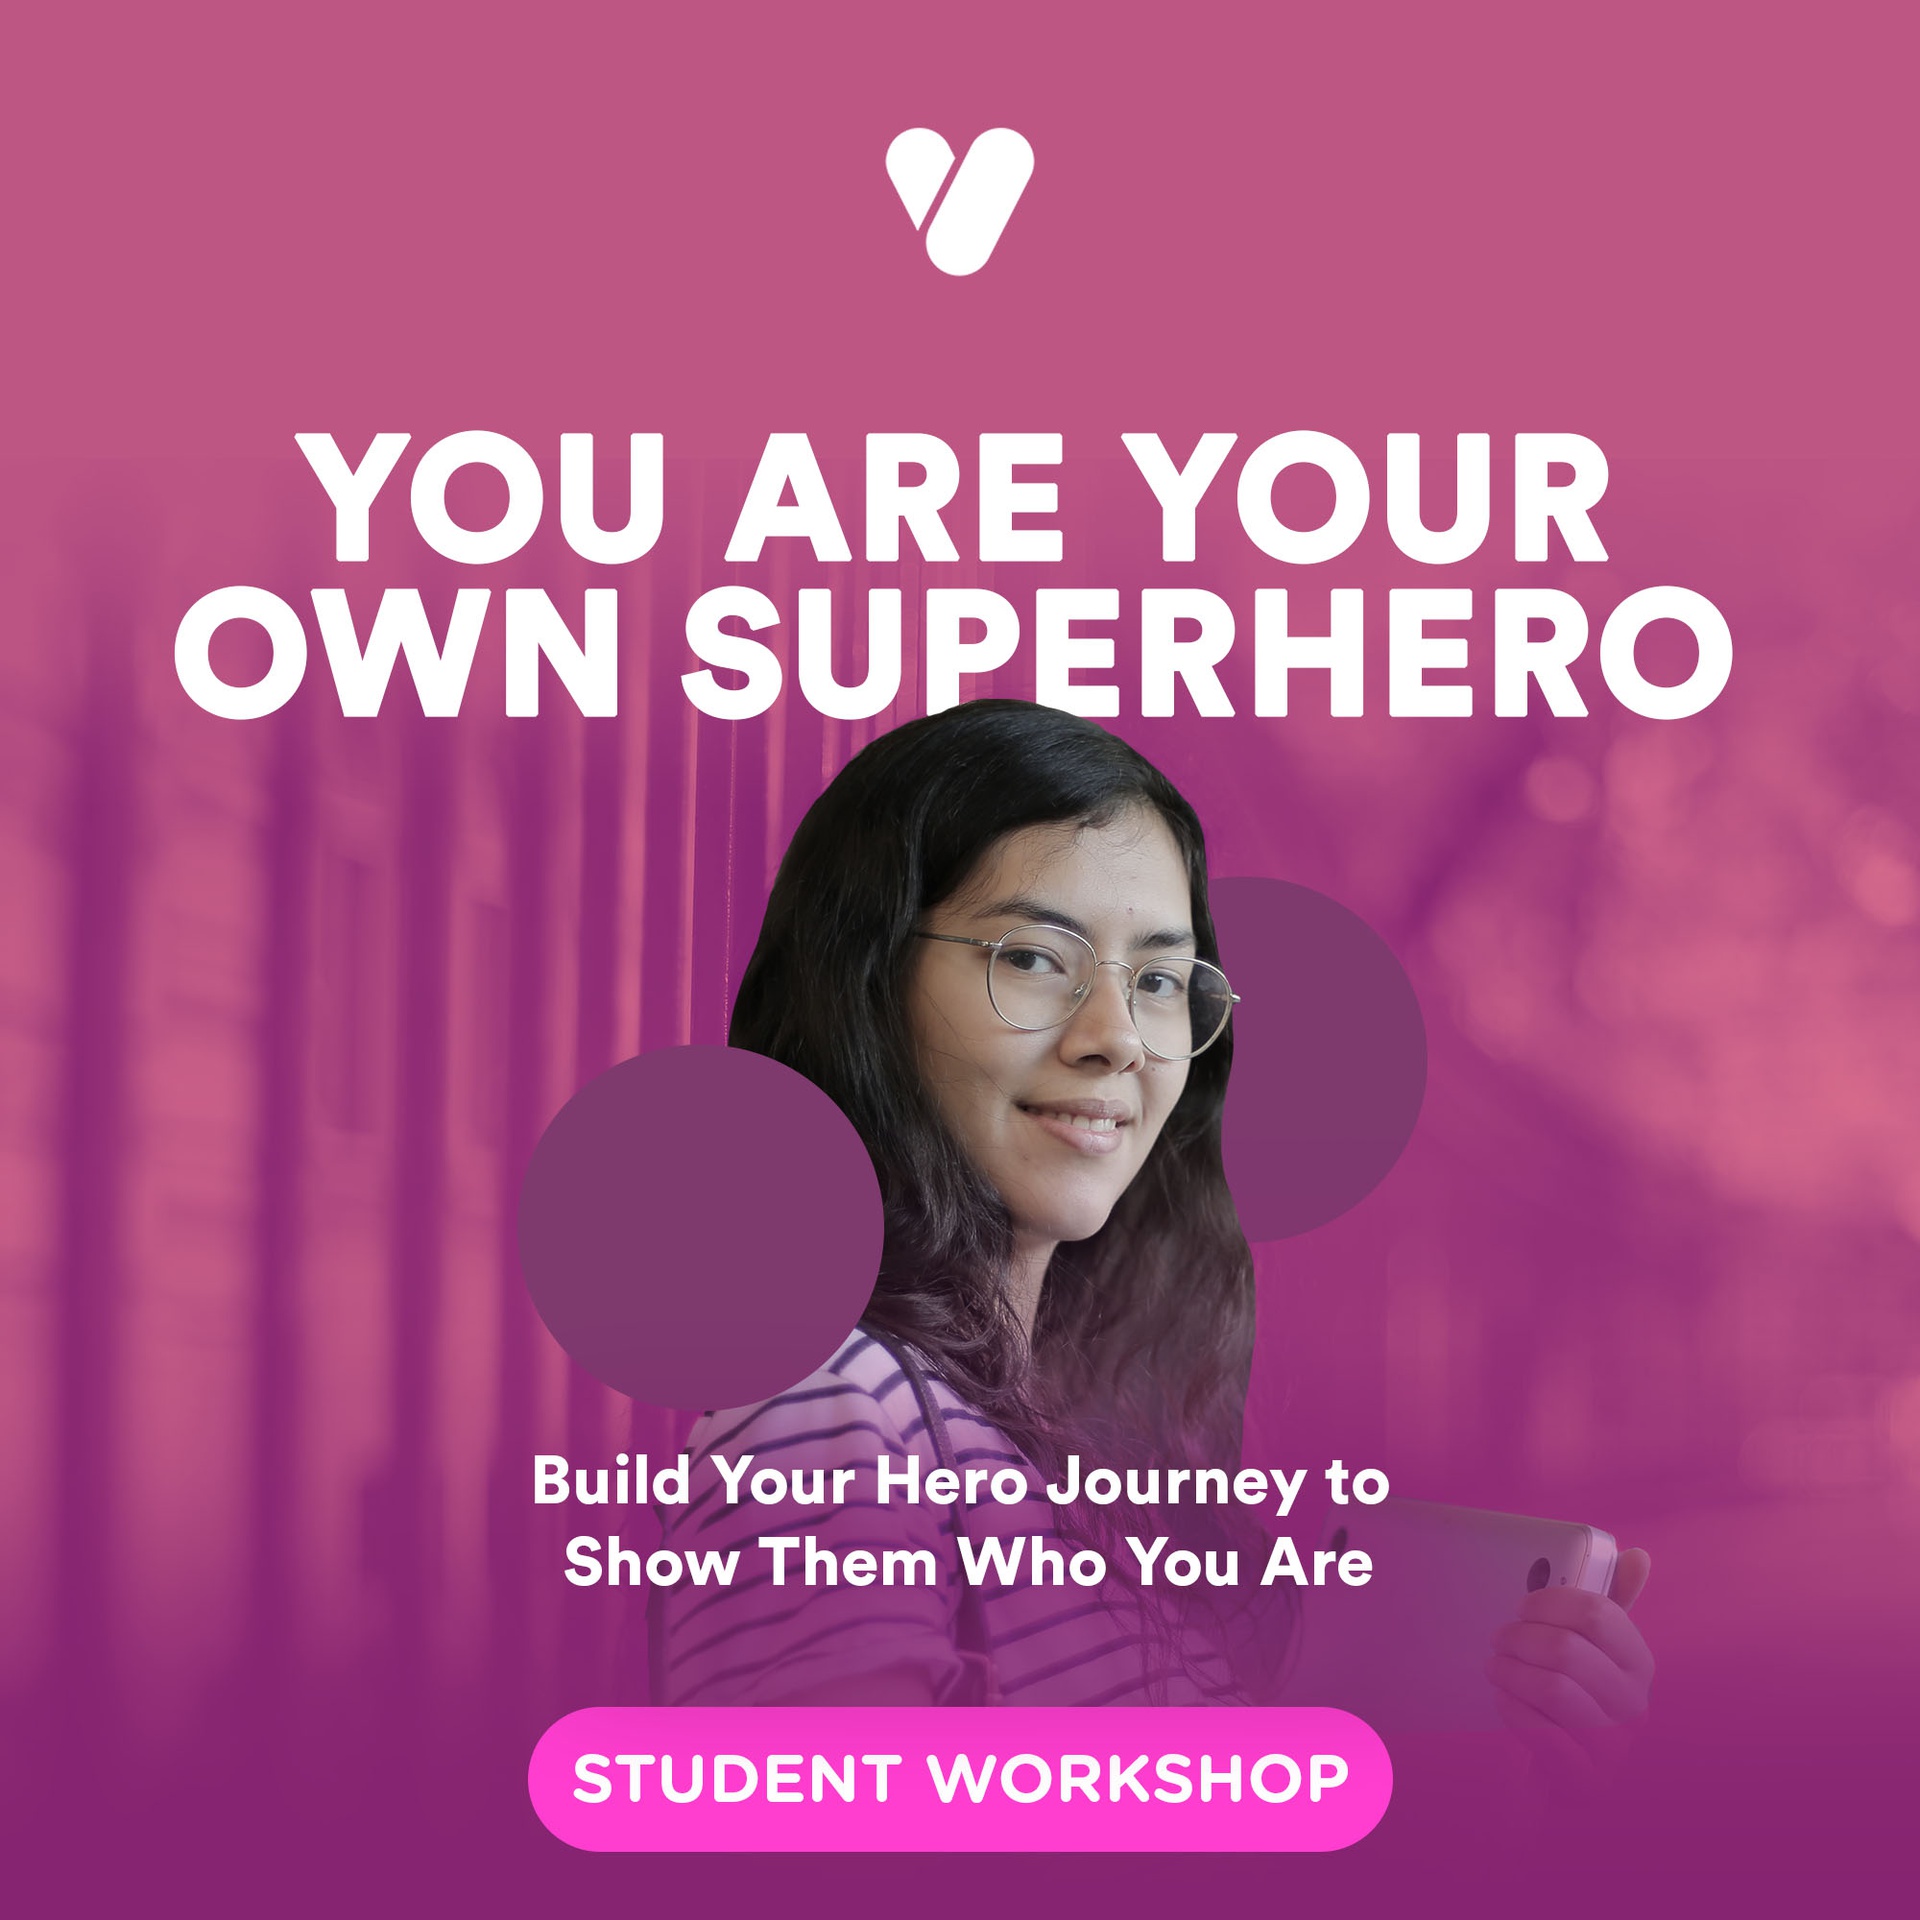 You are Your Own Superhero: Build Your Hero Journey to Show Them Who You Are